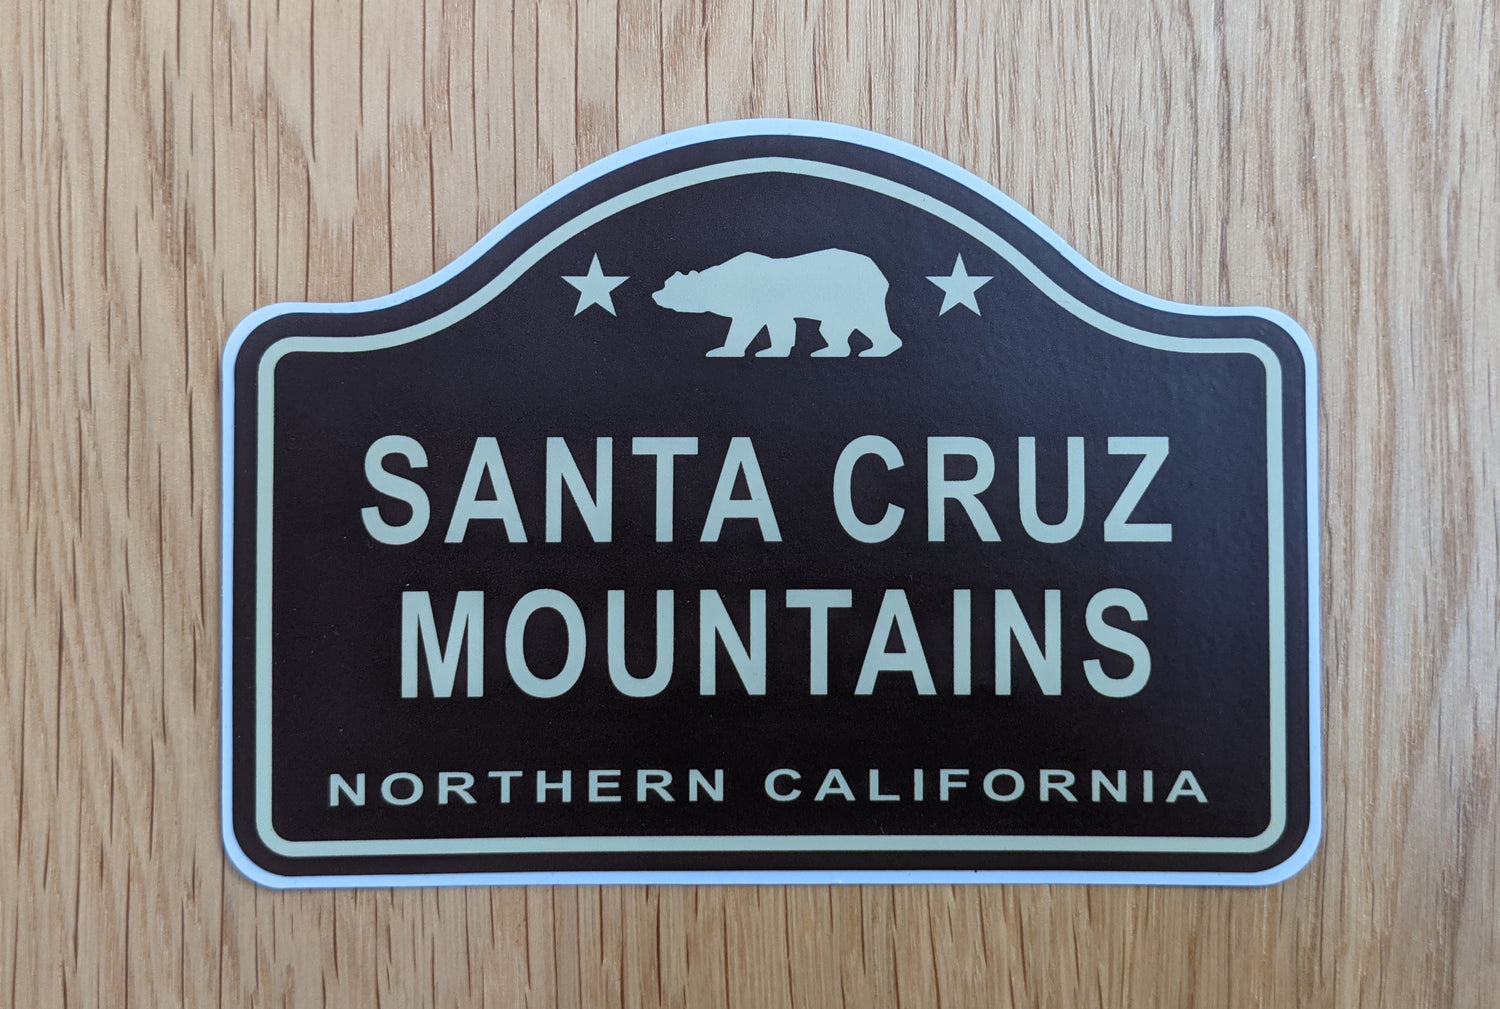 Historic sign inspired brown sticker reading "Santa Cruz Mountains, Northern California", by SCM Clothing